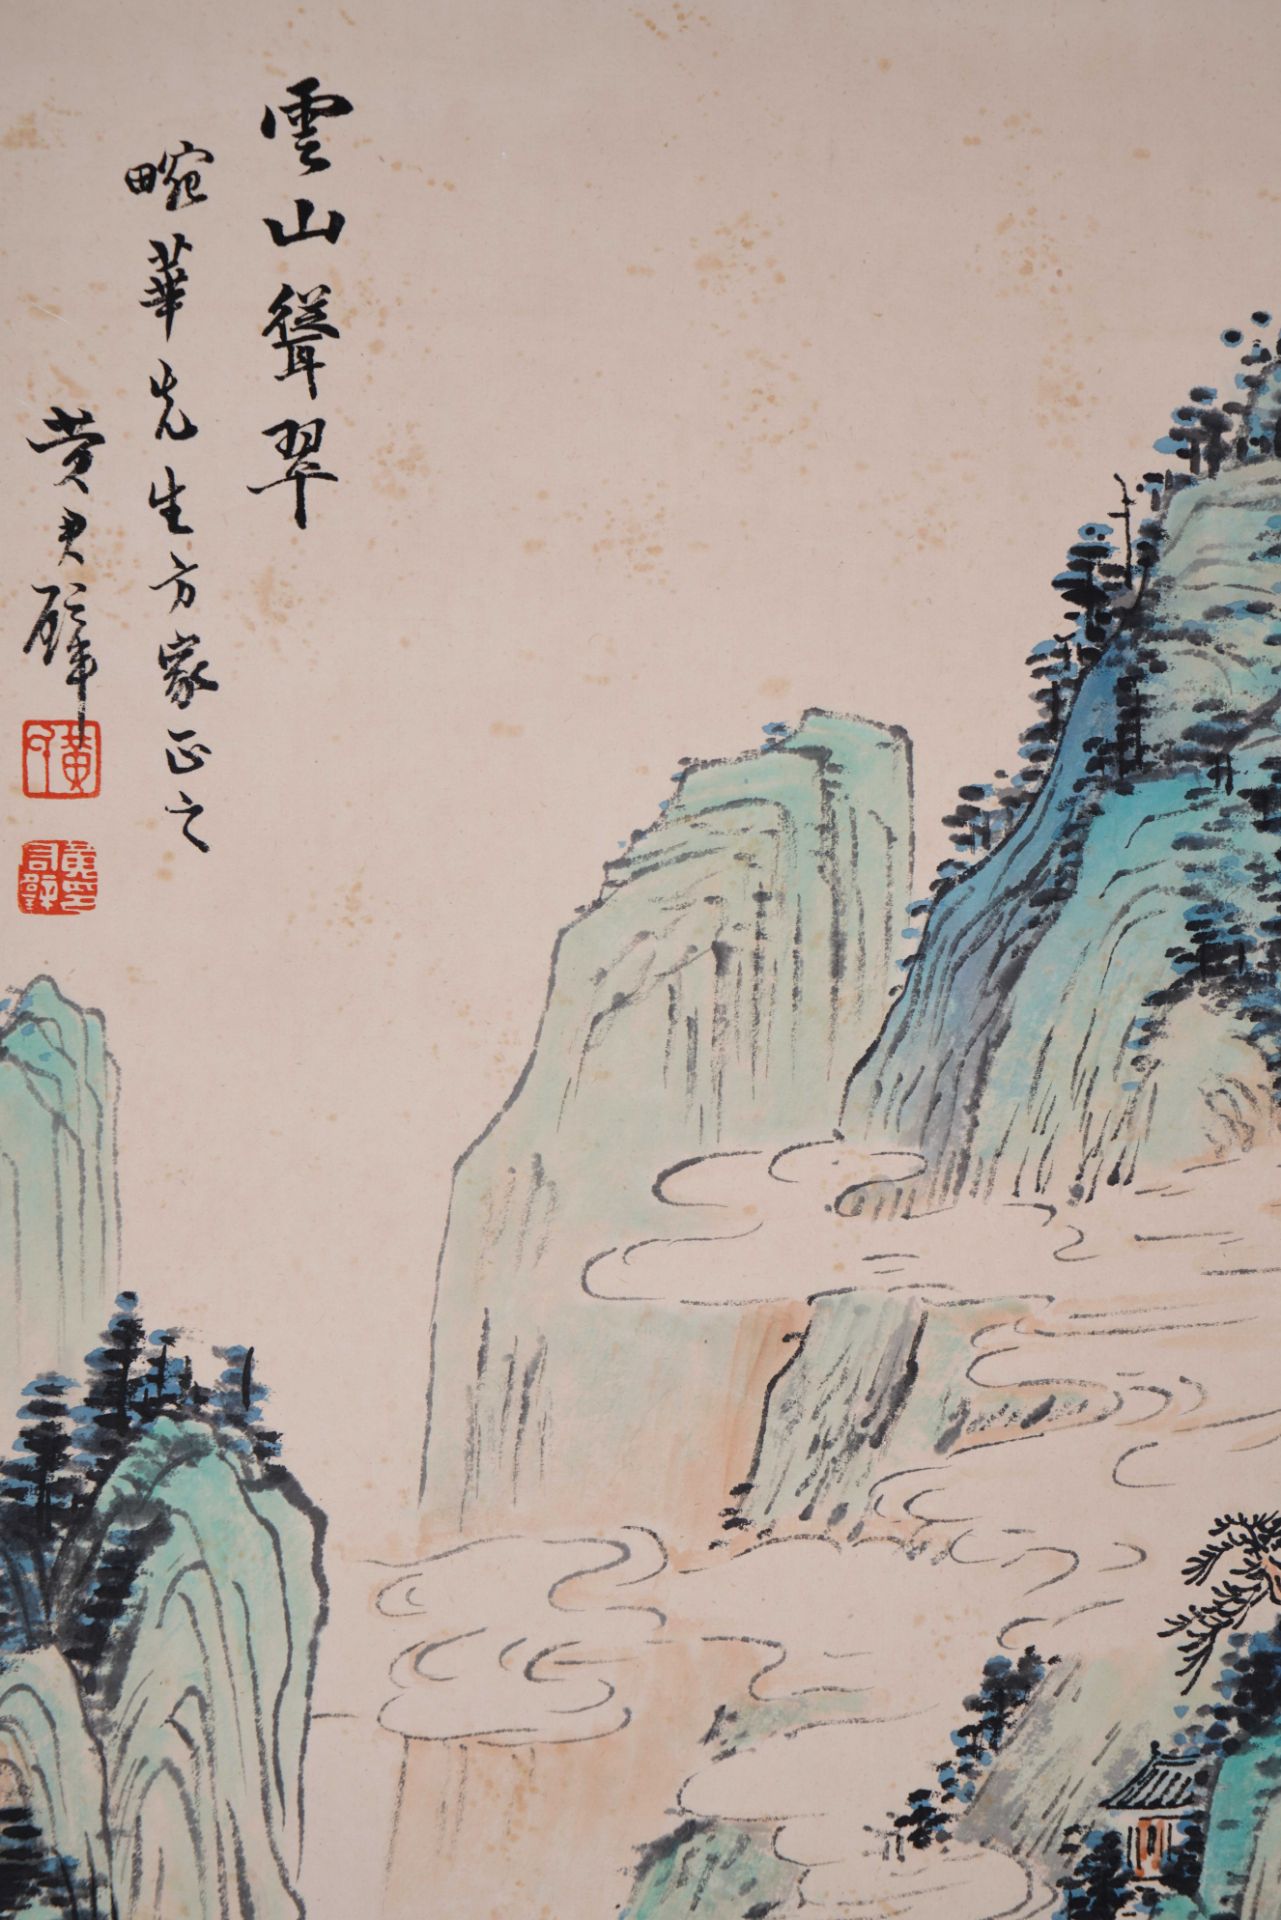 A Chinese Scroll Painting by Huang Junbi - Image 3 of 11